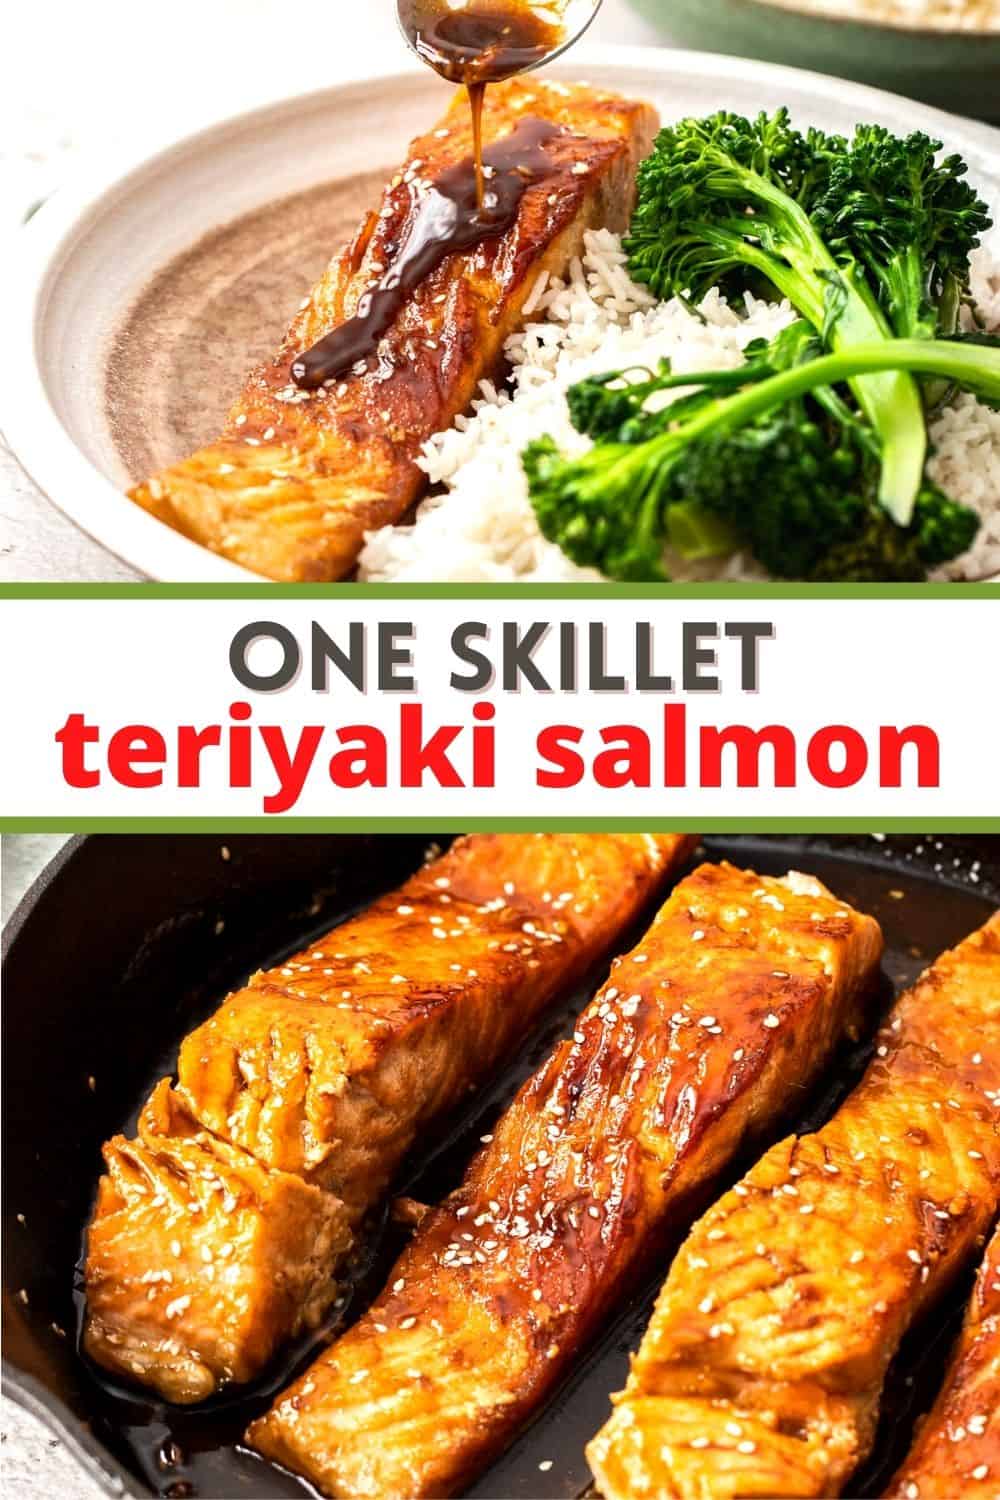 Teriyaki salmon is served alongside rice and veggies with a simple homemade glaze. Cooked in a skillet, this sweet salmon is ready in minutes!